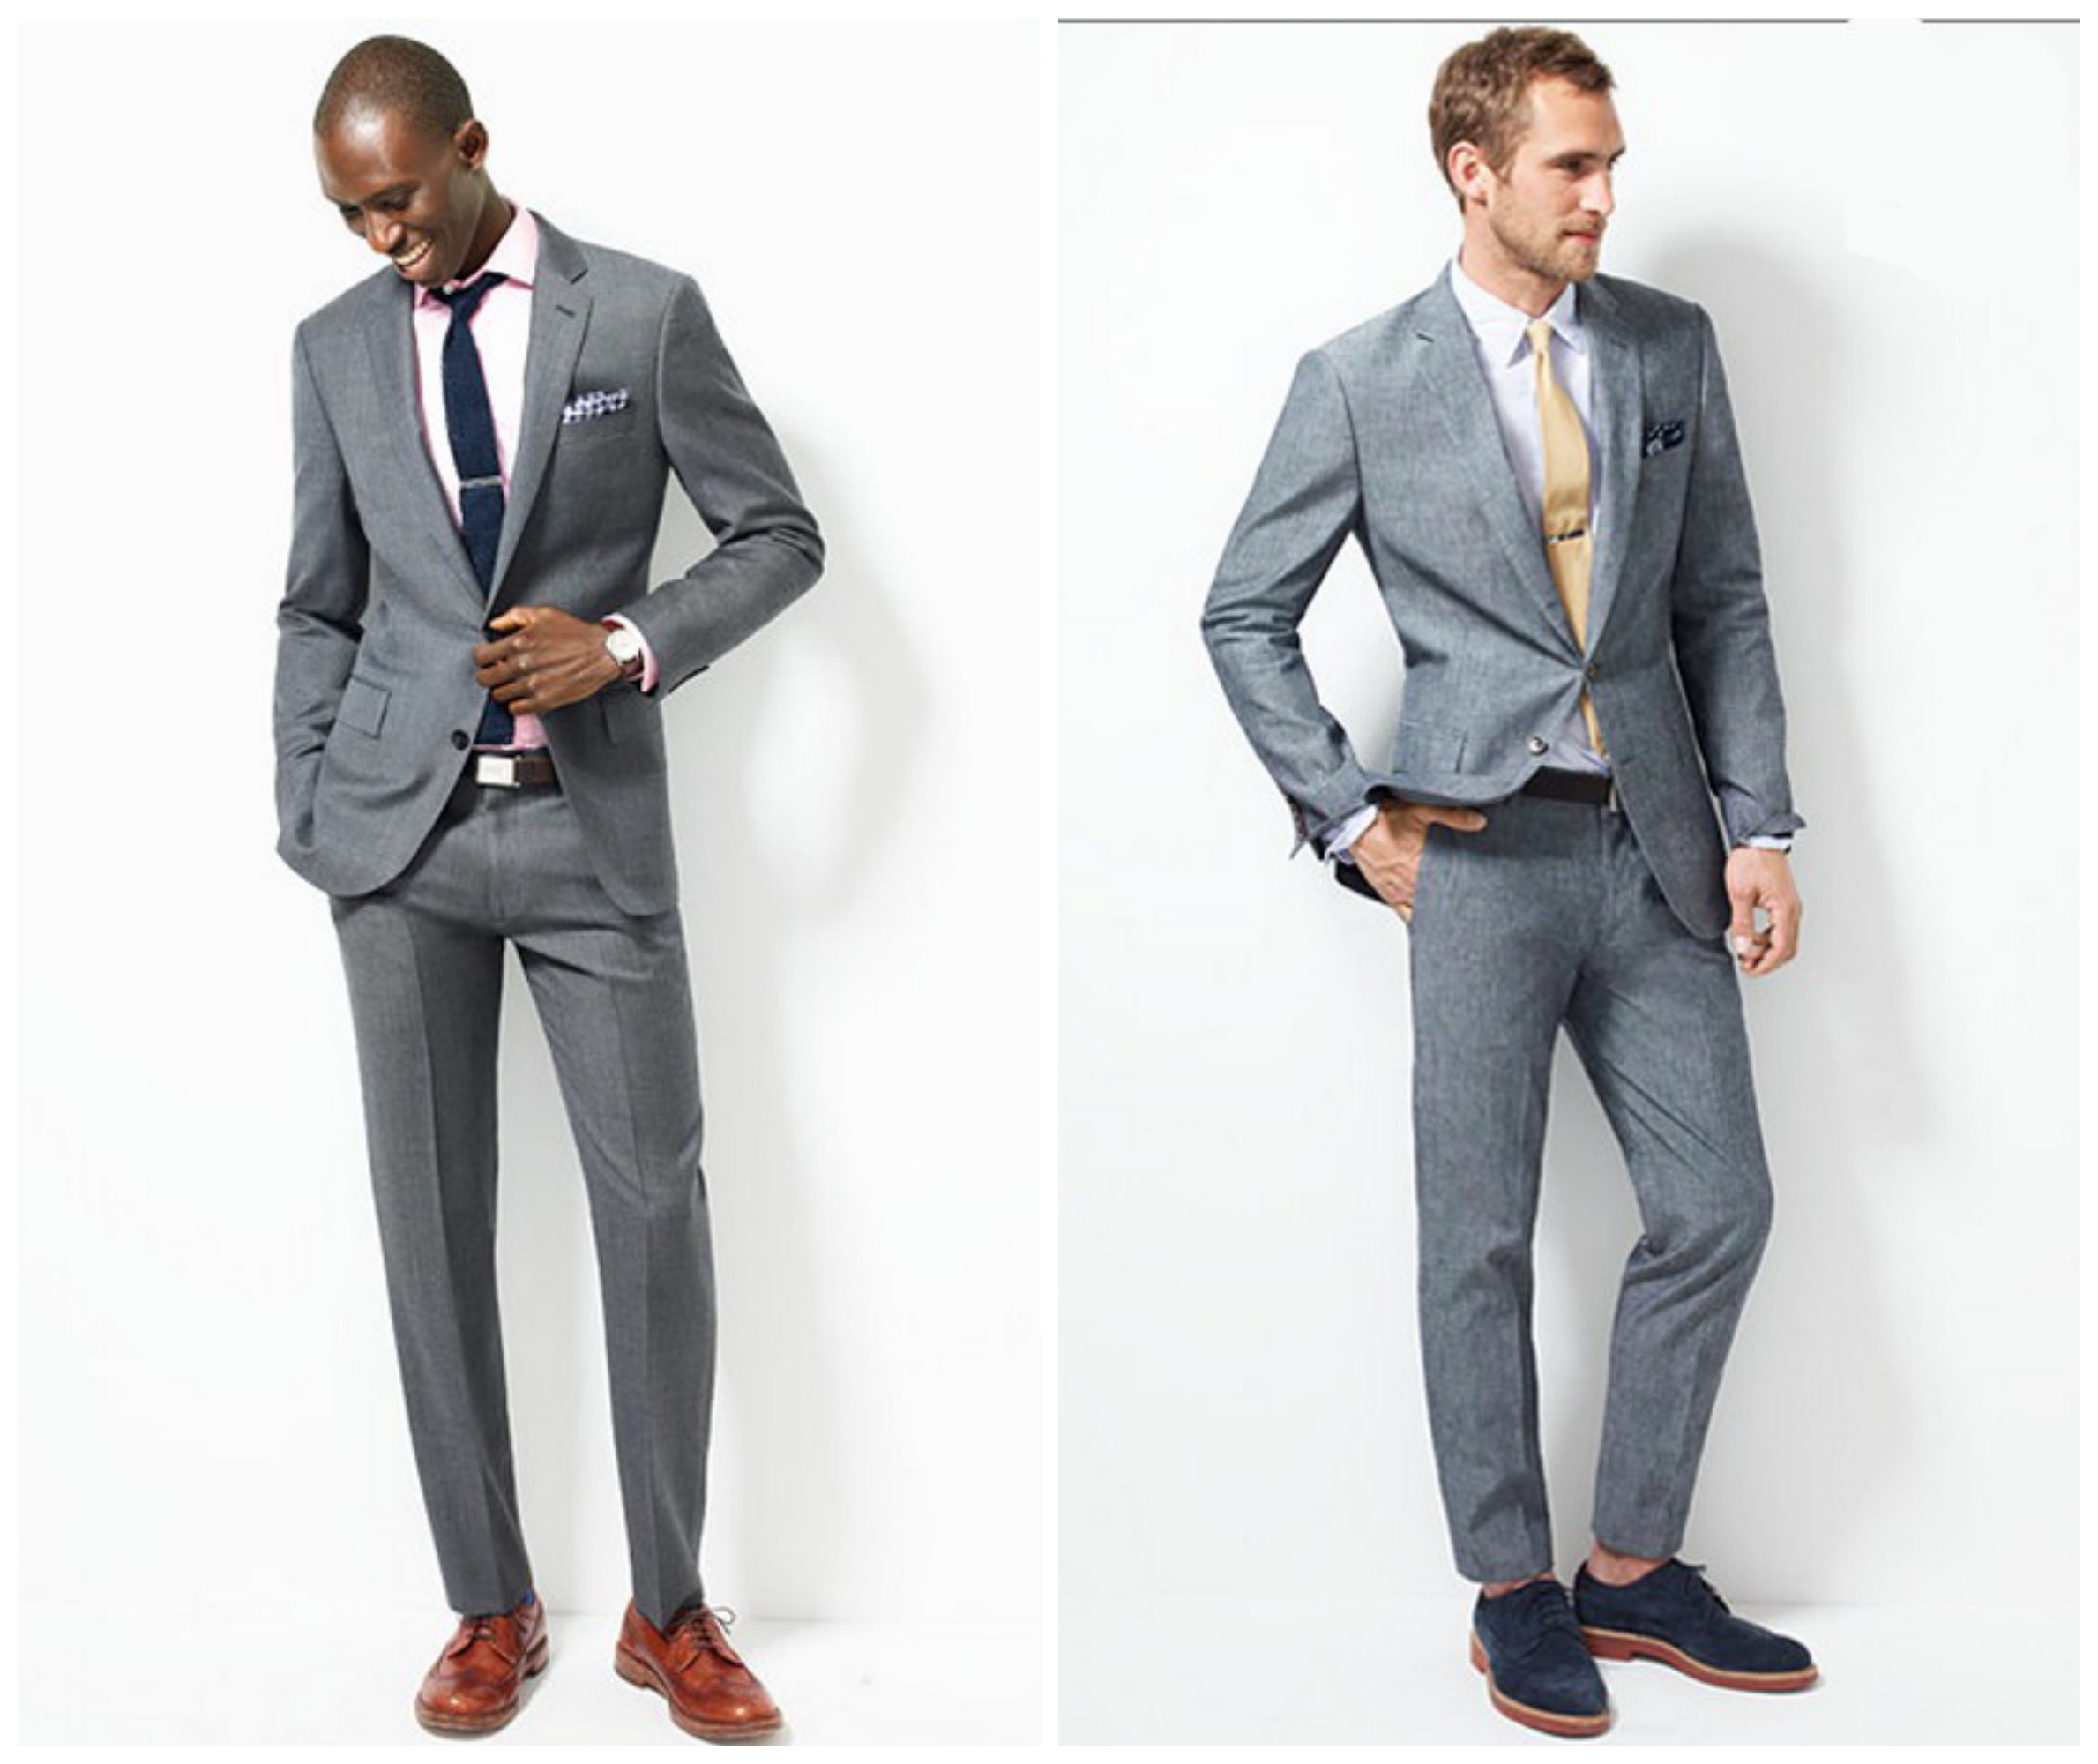 Finding The Right Outfit For The Groom - Rustic Wedding Chic